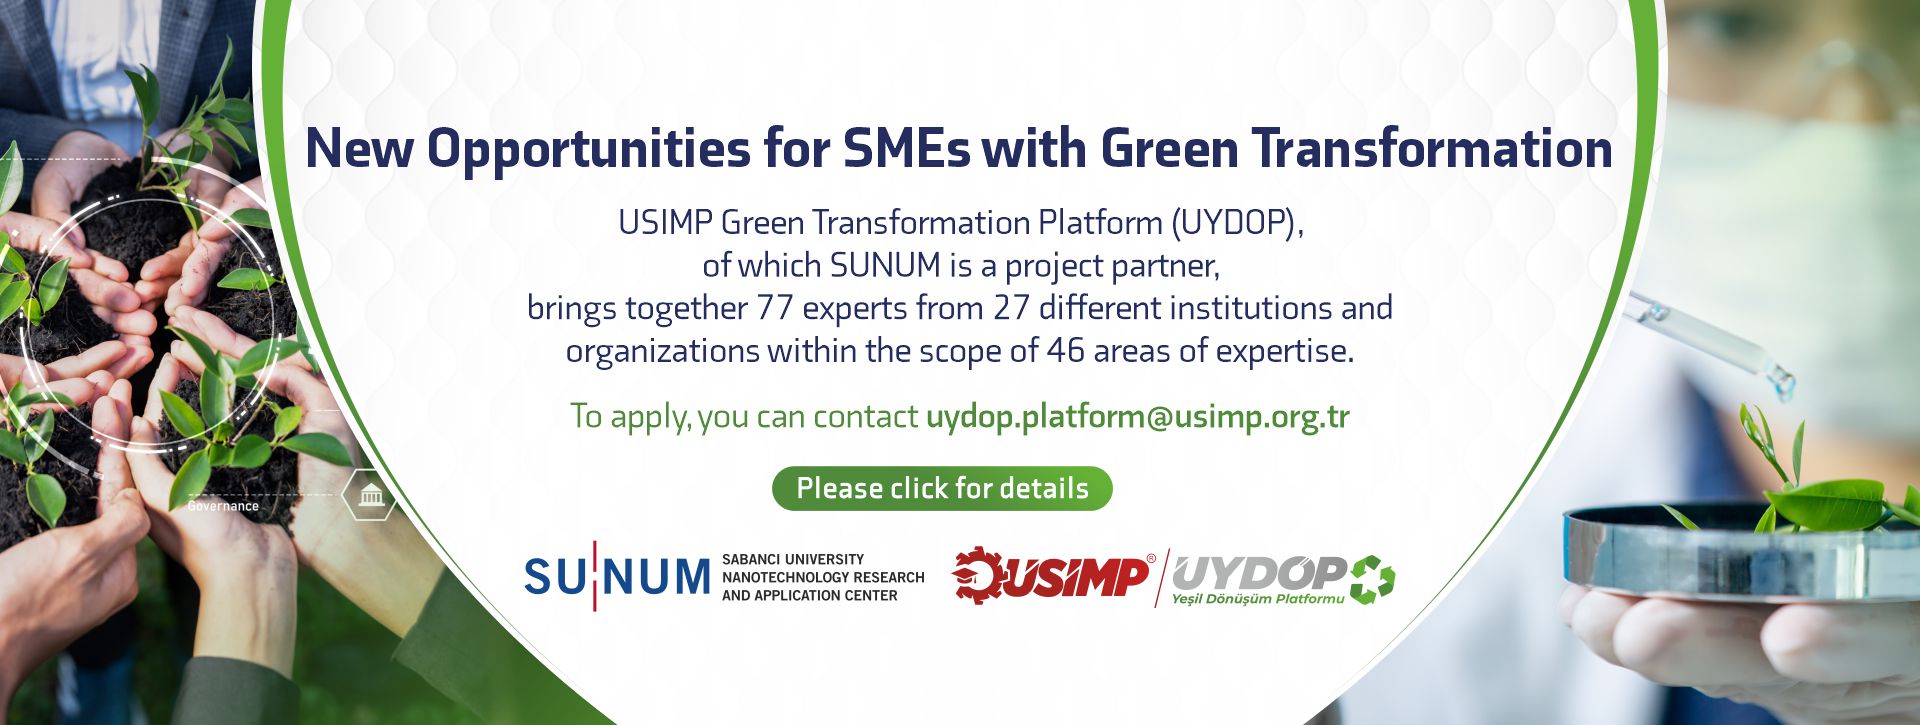 New Opportunities for SMEs with Green Transformation!